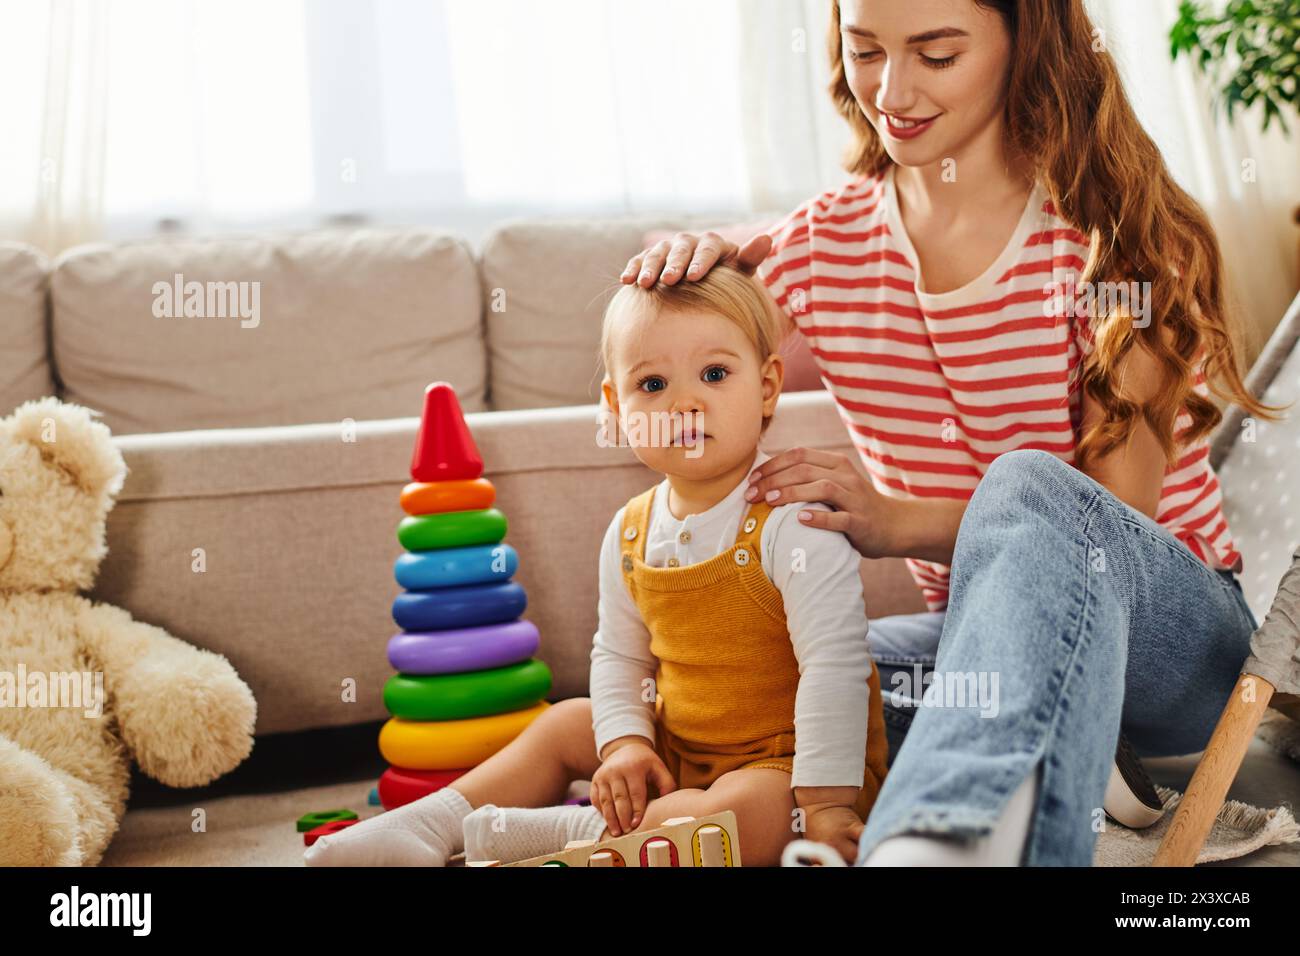 A young mother sits on the floor combing her toddler daughters hair with care and tenderness. Stock Photo